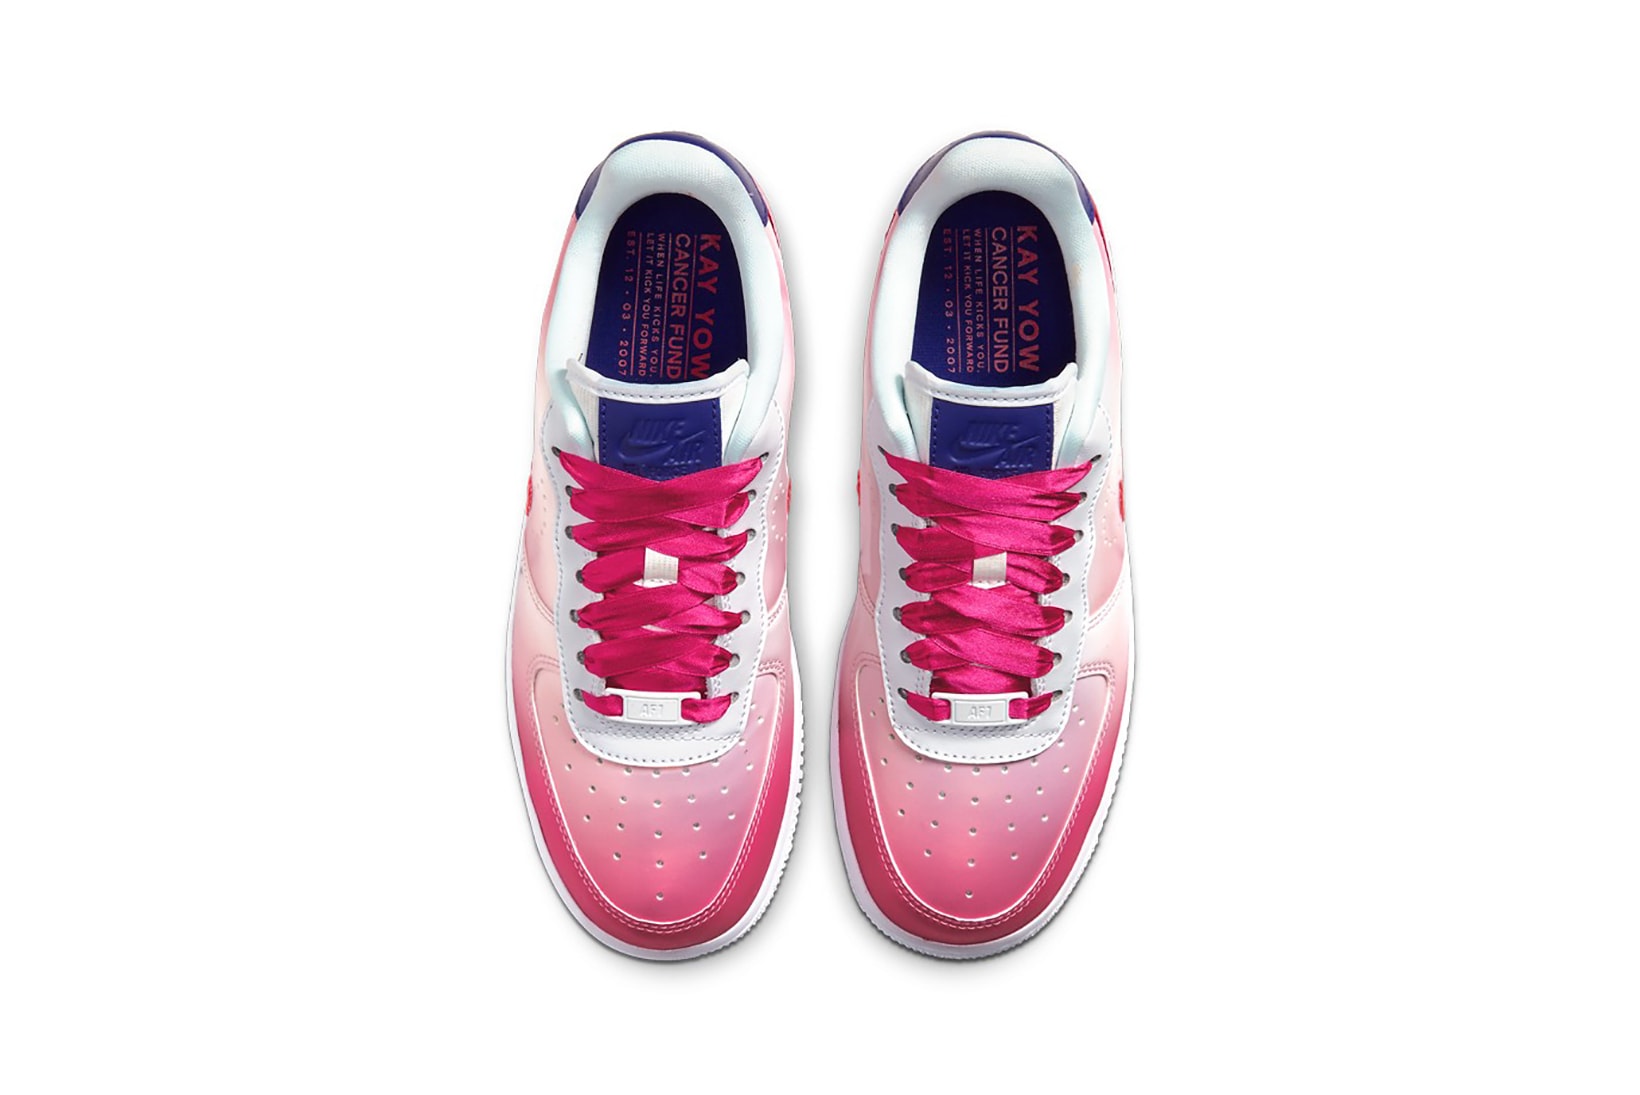 nike air force 1 kay yow cancer fund sneakers collaboration pink white blue shoes sneakerhead